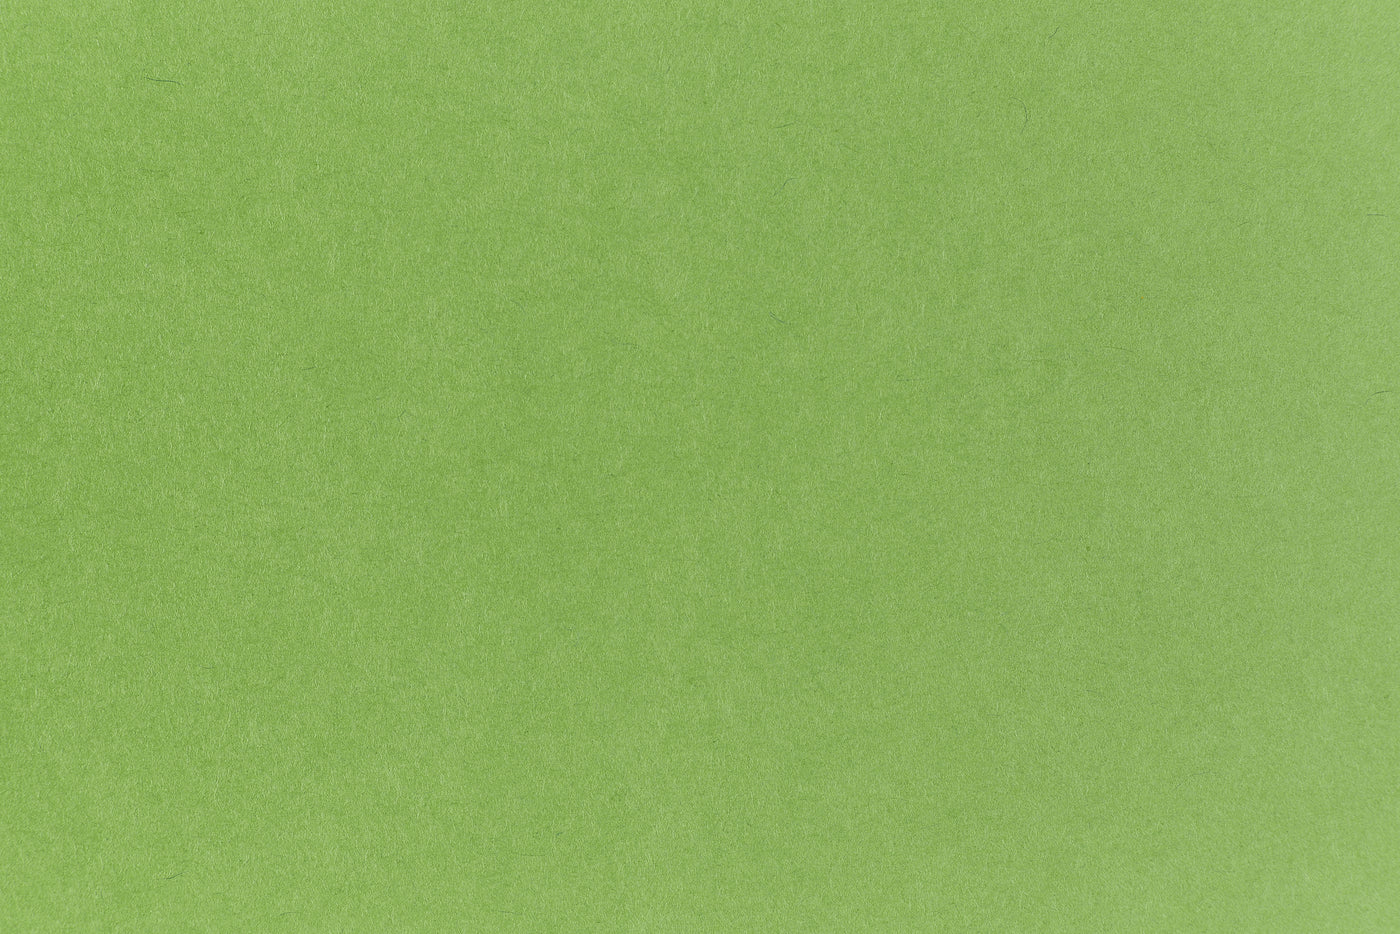 Neon Yellow Cardstock (Glo-Tone, Cover Weight)